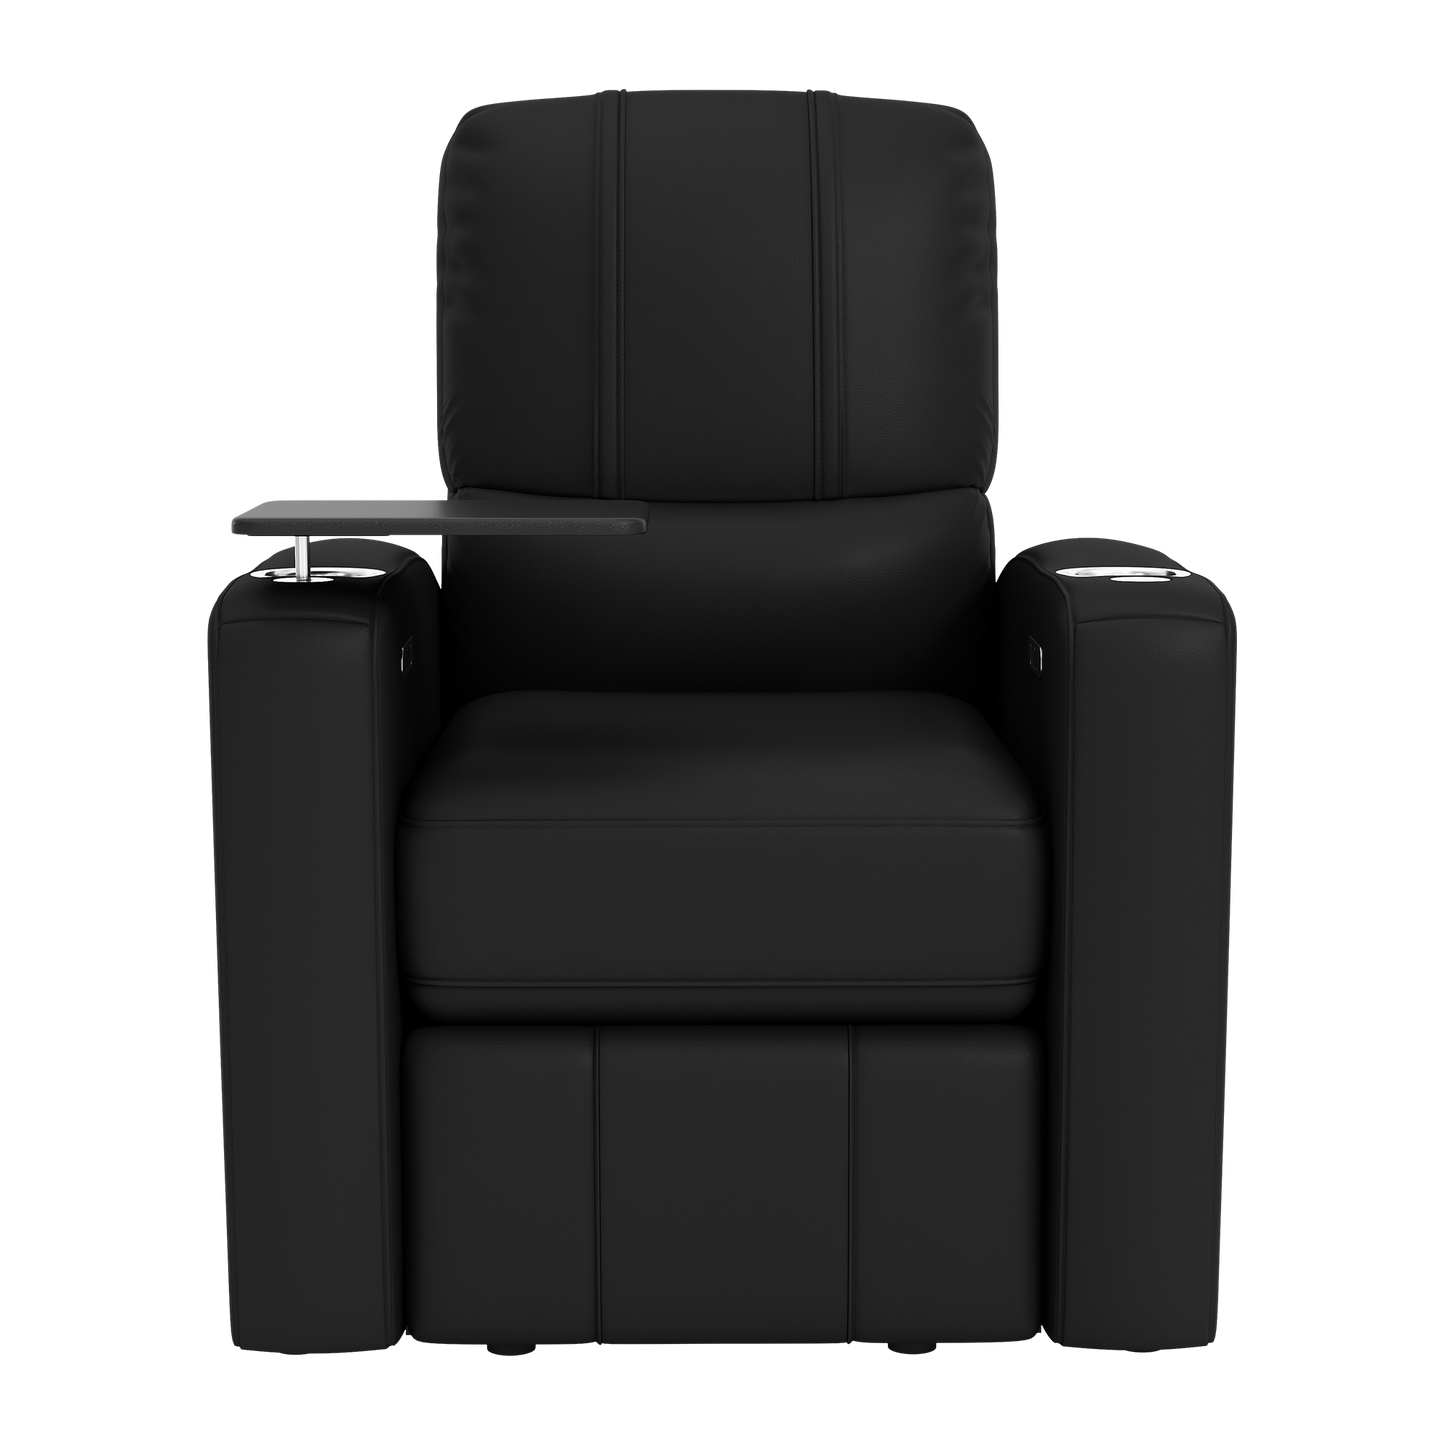 Stealth Power Plus Recliner with Atlanta Braves Logo